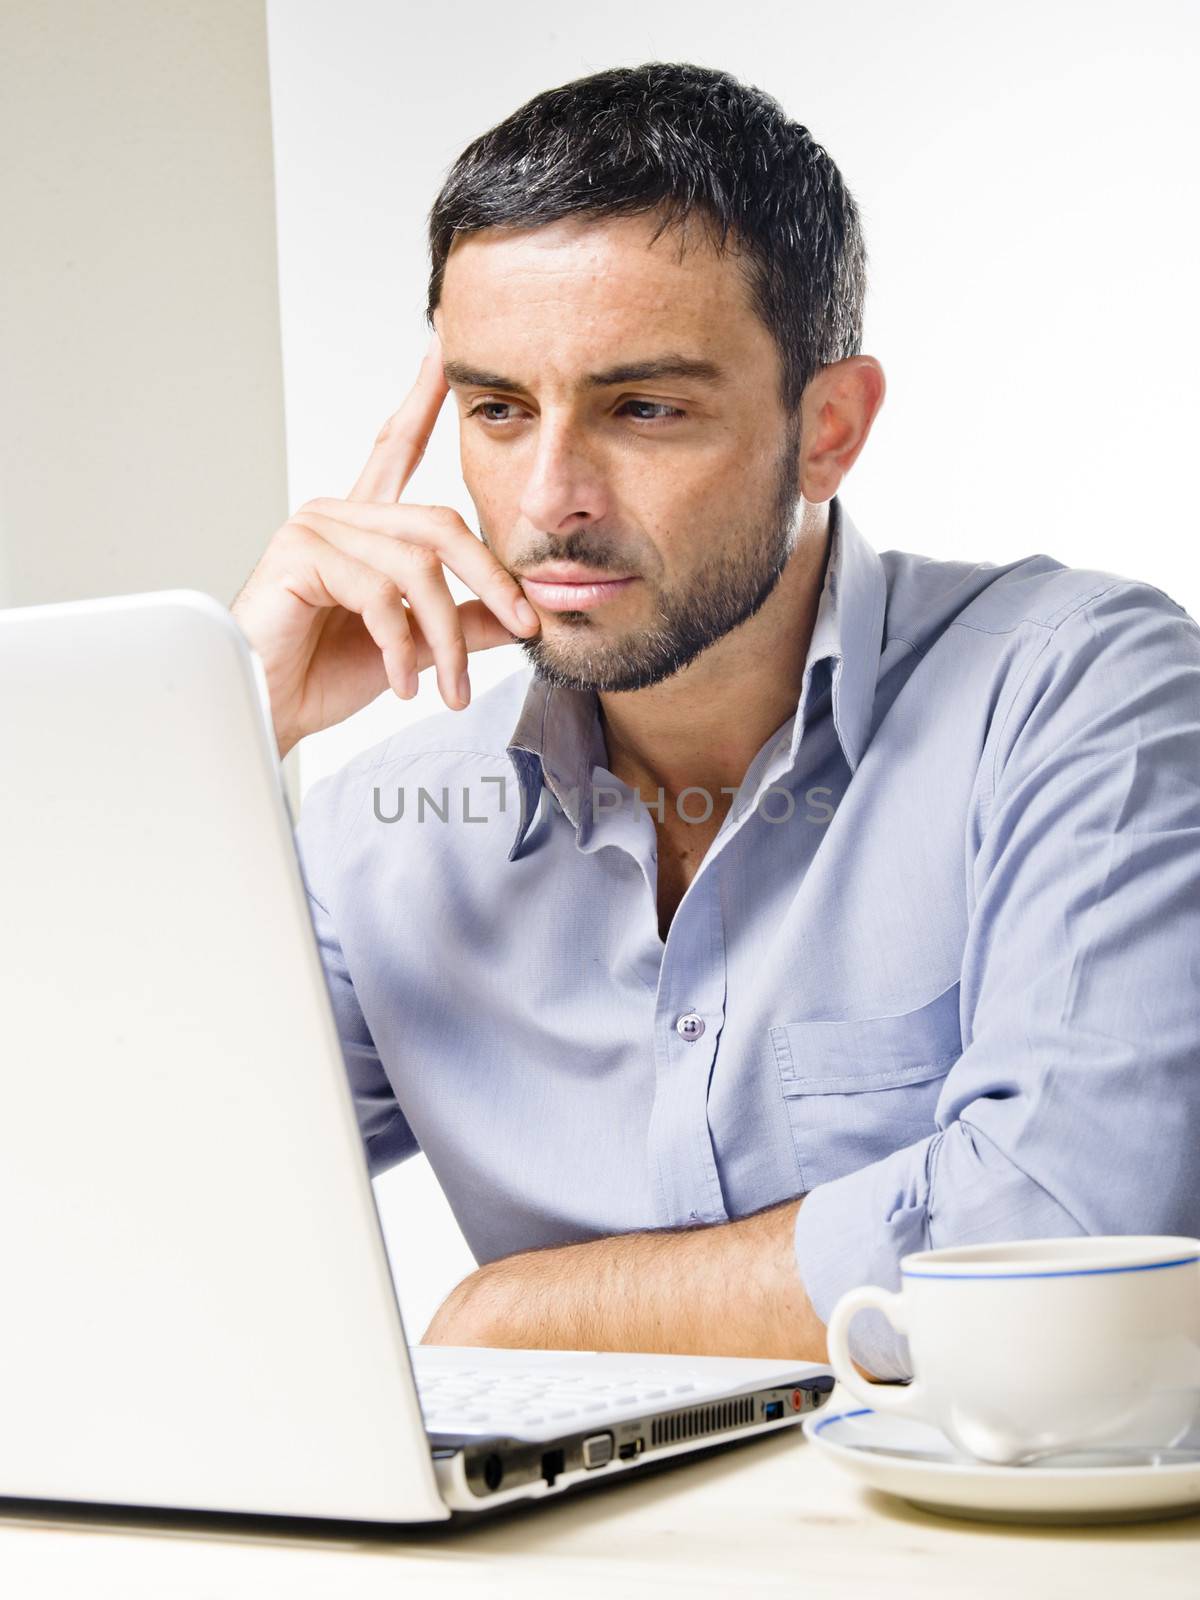 Young Man with Beard Working on Laptop isolated on a White Background